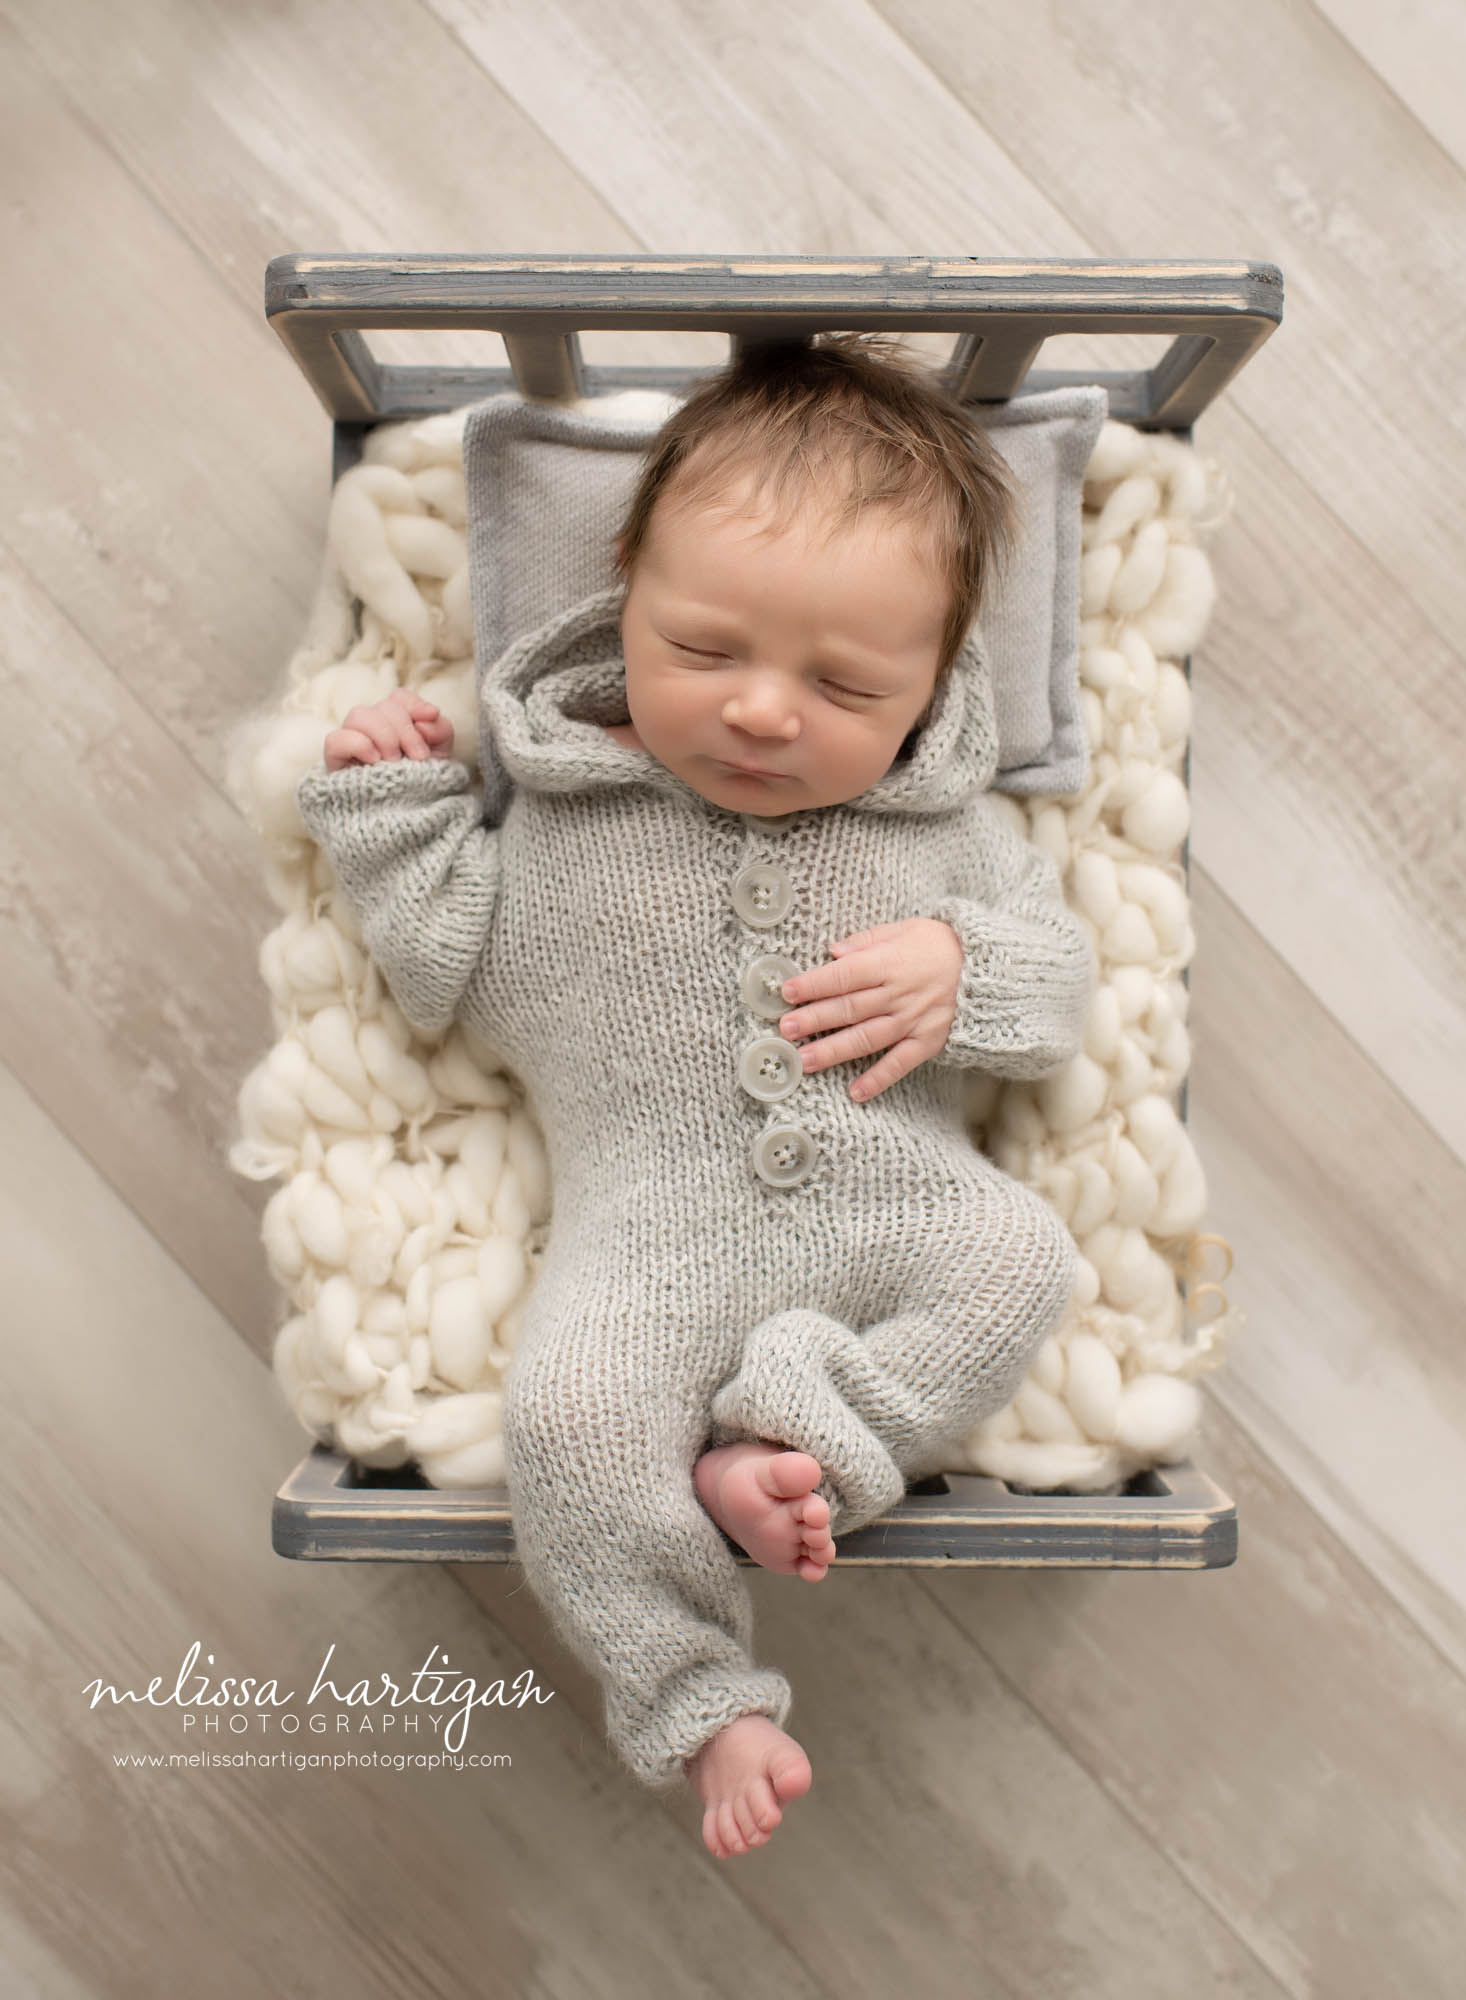 Newborn baby boy posed on wooden bed laying on back wearing grey outfit